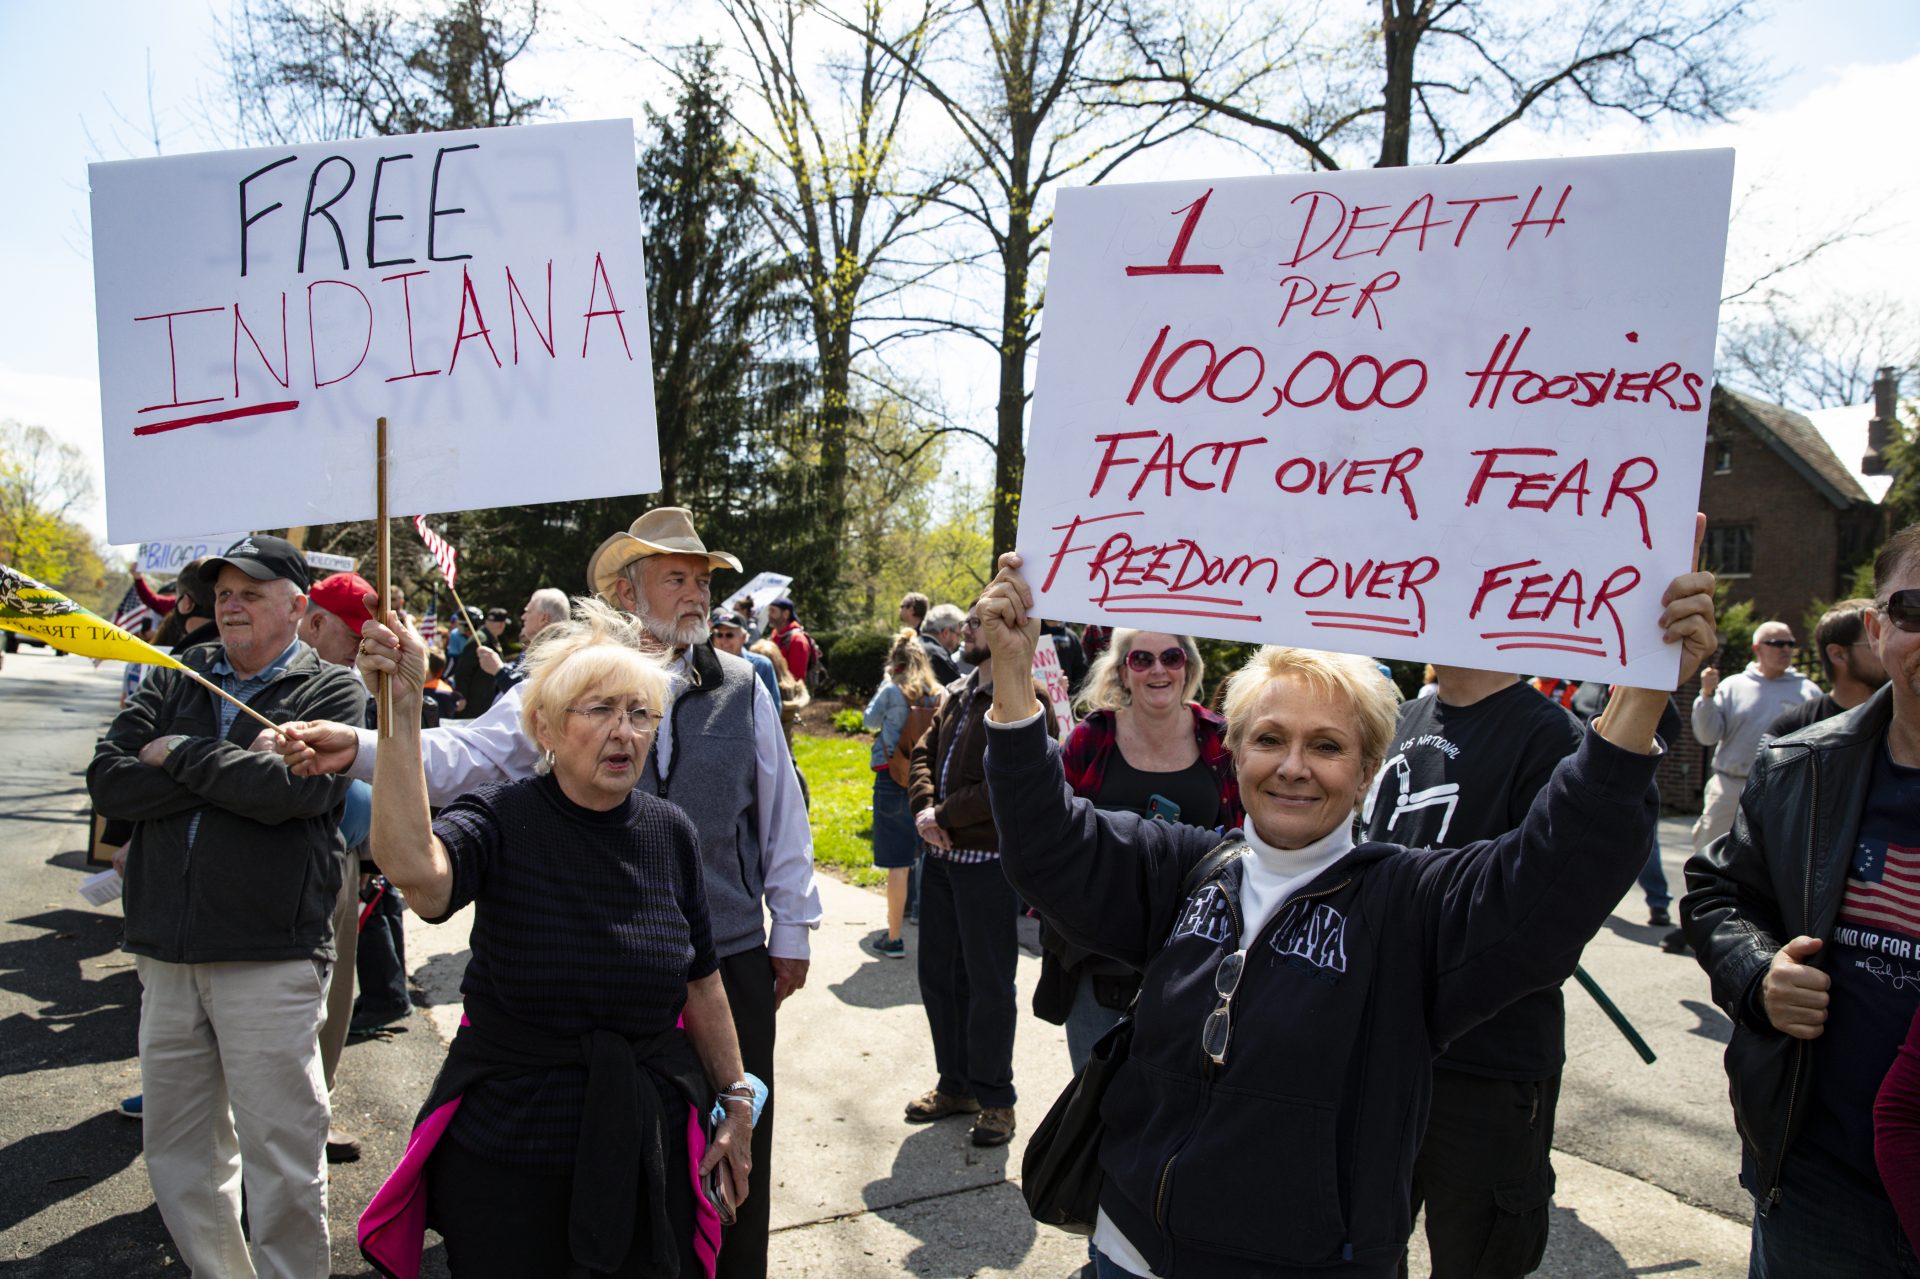 Protesters gather outside the Indiana Governor’s mansion in Indianapolis, Saturday, April 18, 2020, urging Gov. Eric Holcomb to back off restrictions on Indiana residents because of the coronavirus, and restart the economy. (AP Photo/Michael Conroy)